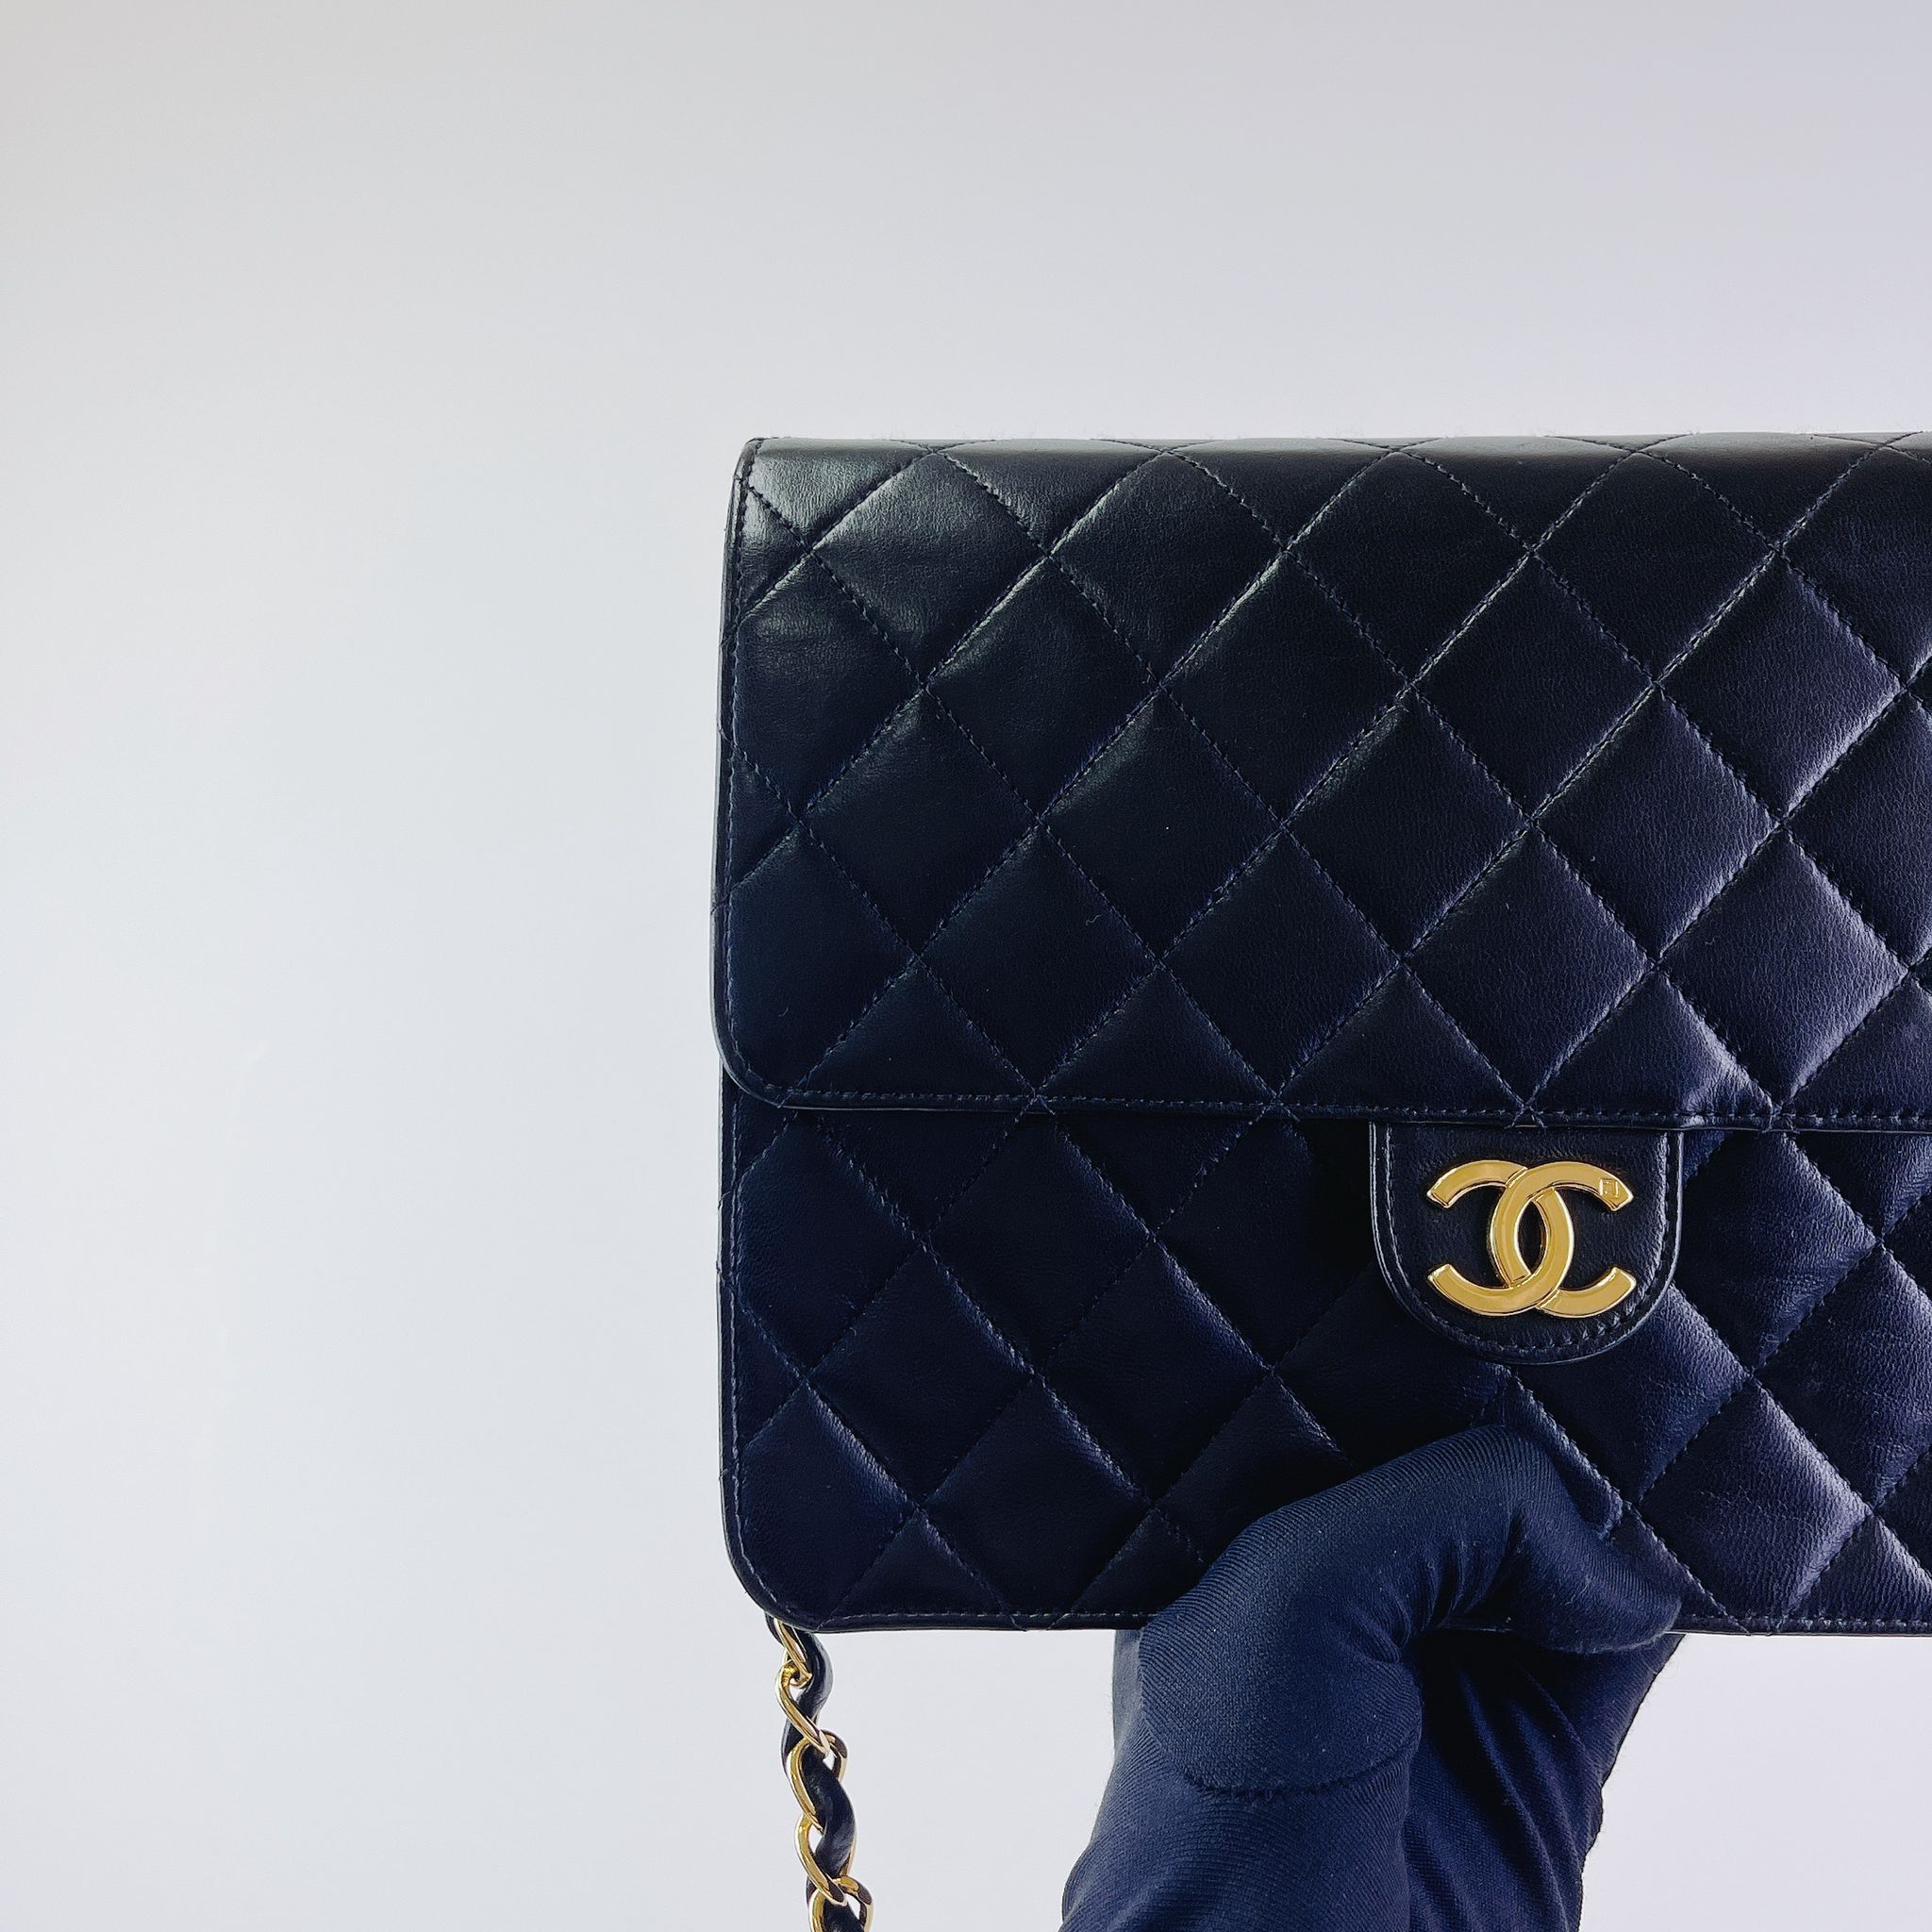 Chanel Vintage Square Small Flap